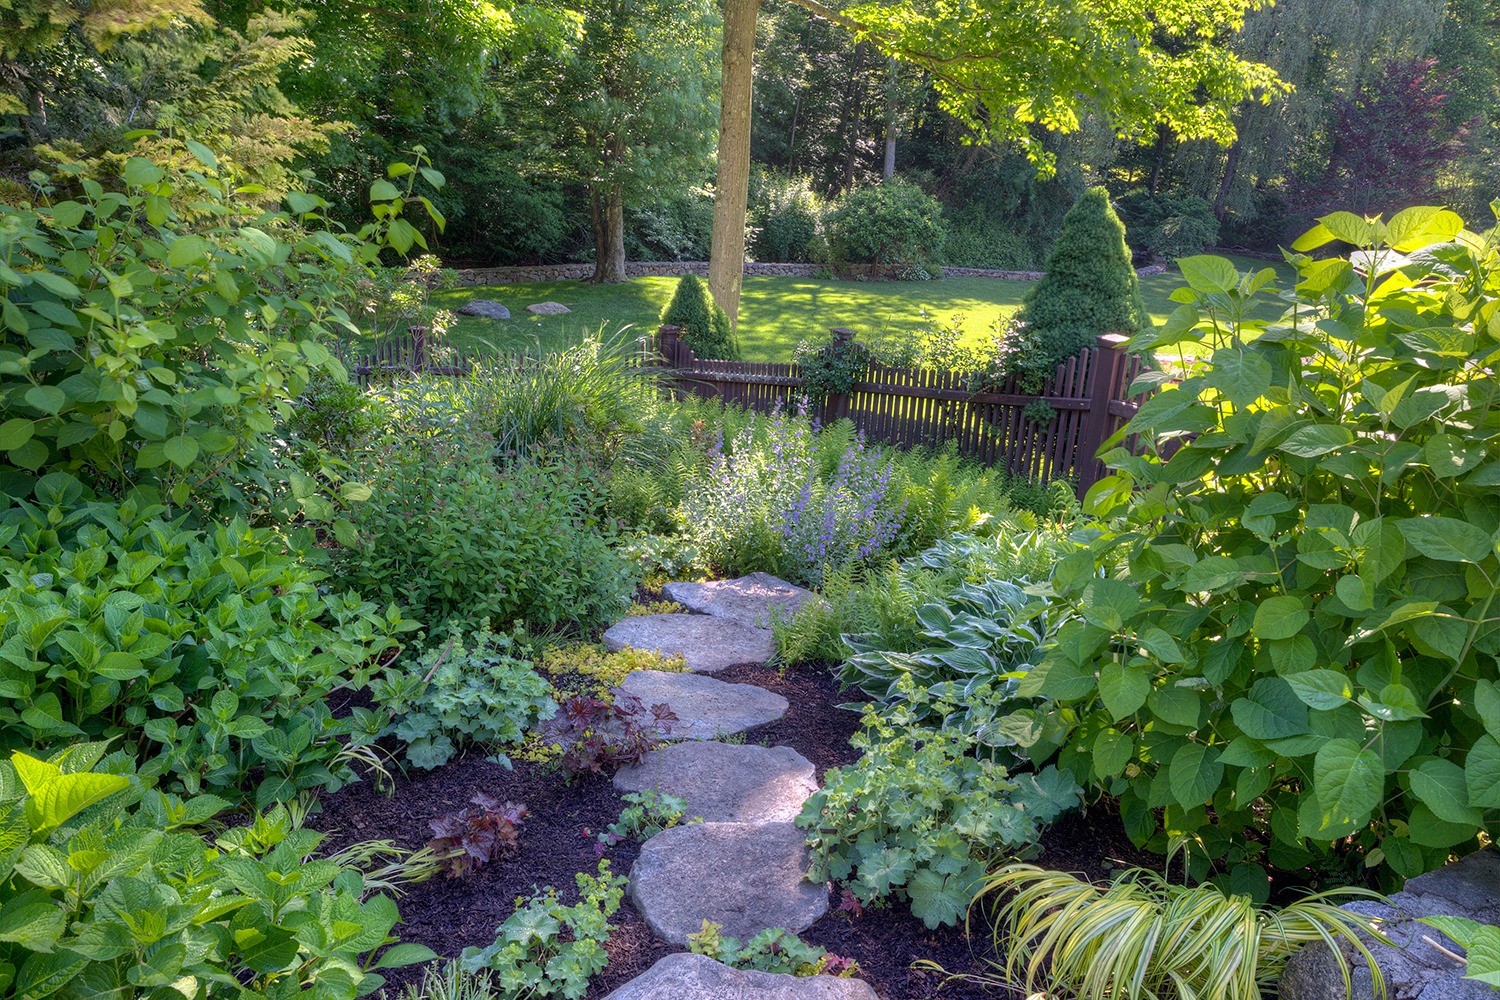 A serene garden with a stone path leading through lush vegetation to a neatly trimmed lawn, surrounded by a wooden fence, and shaded by trees.